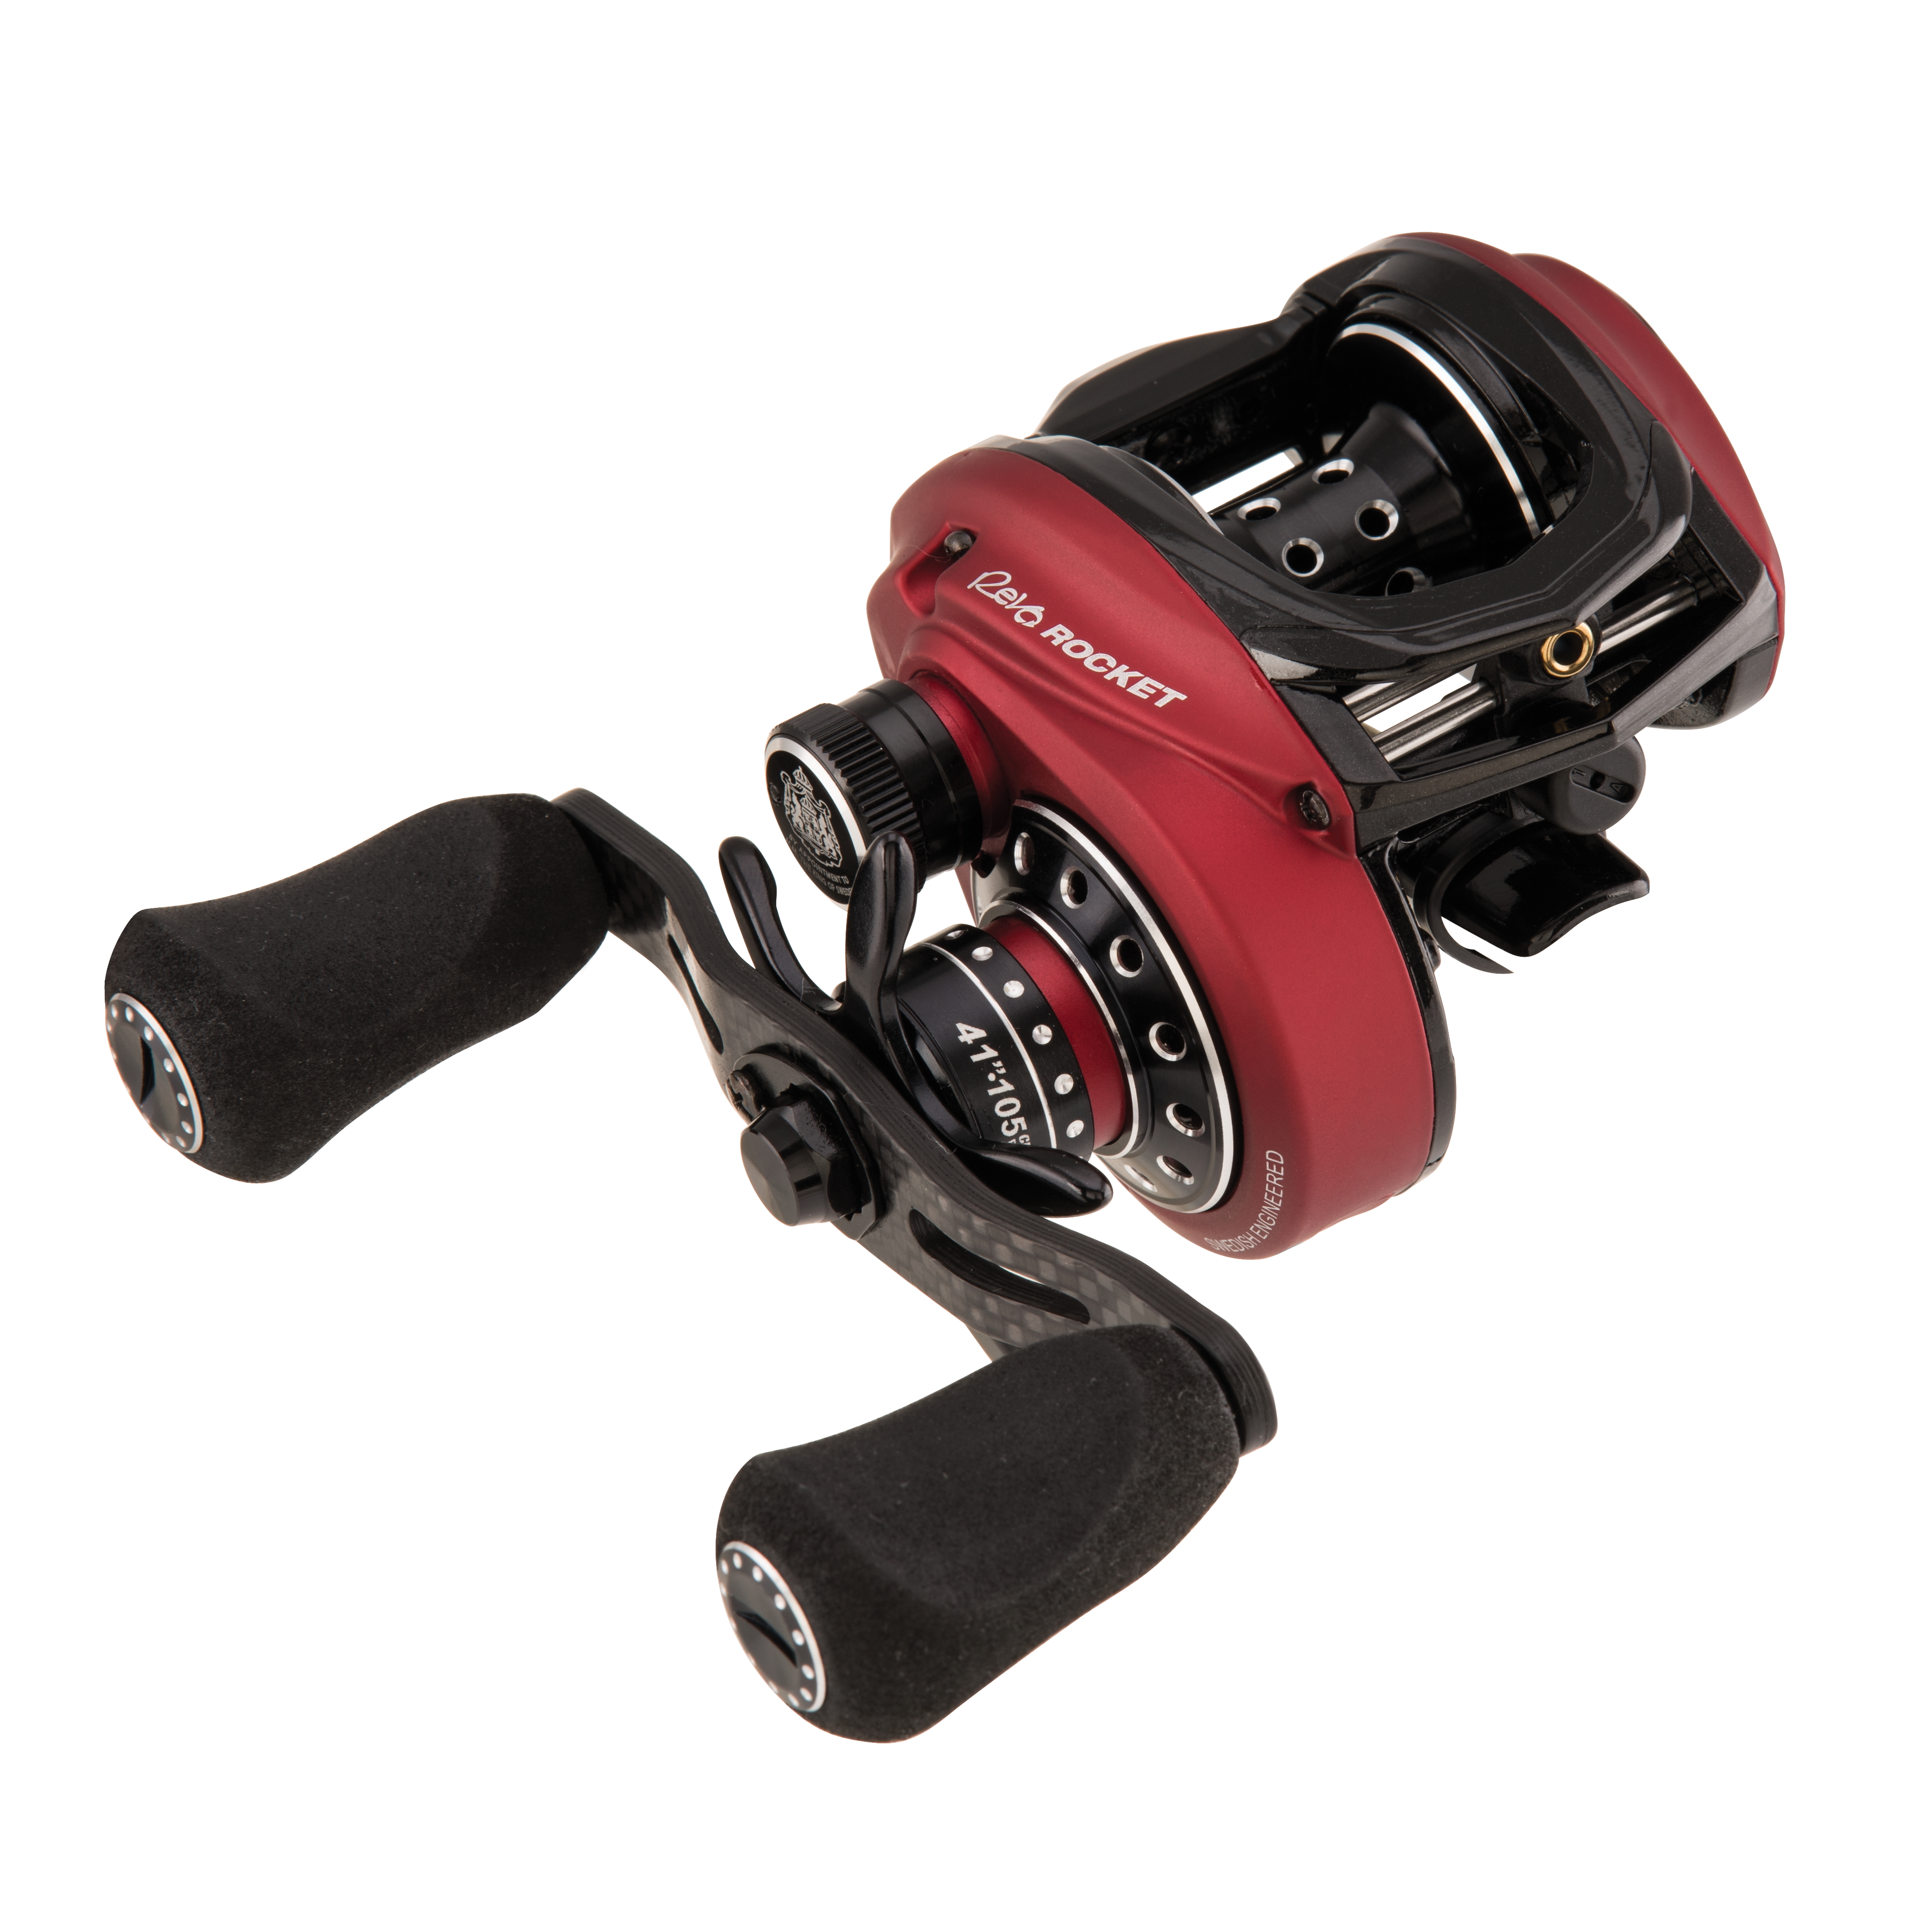 Revo Rocket<br>
Abu Garcia<br>
$299<br>
The new Abu Garcia Revo Rocket packs a punch when it comes to delivering high speed performance.  Featuring our new 10.1:1 rocket gear ratio and delivering 41 inches line per turn, the new Revo Rocket gives anglers speed, compact design and power all in one package. 		